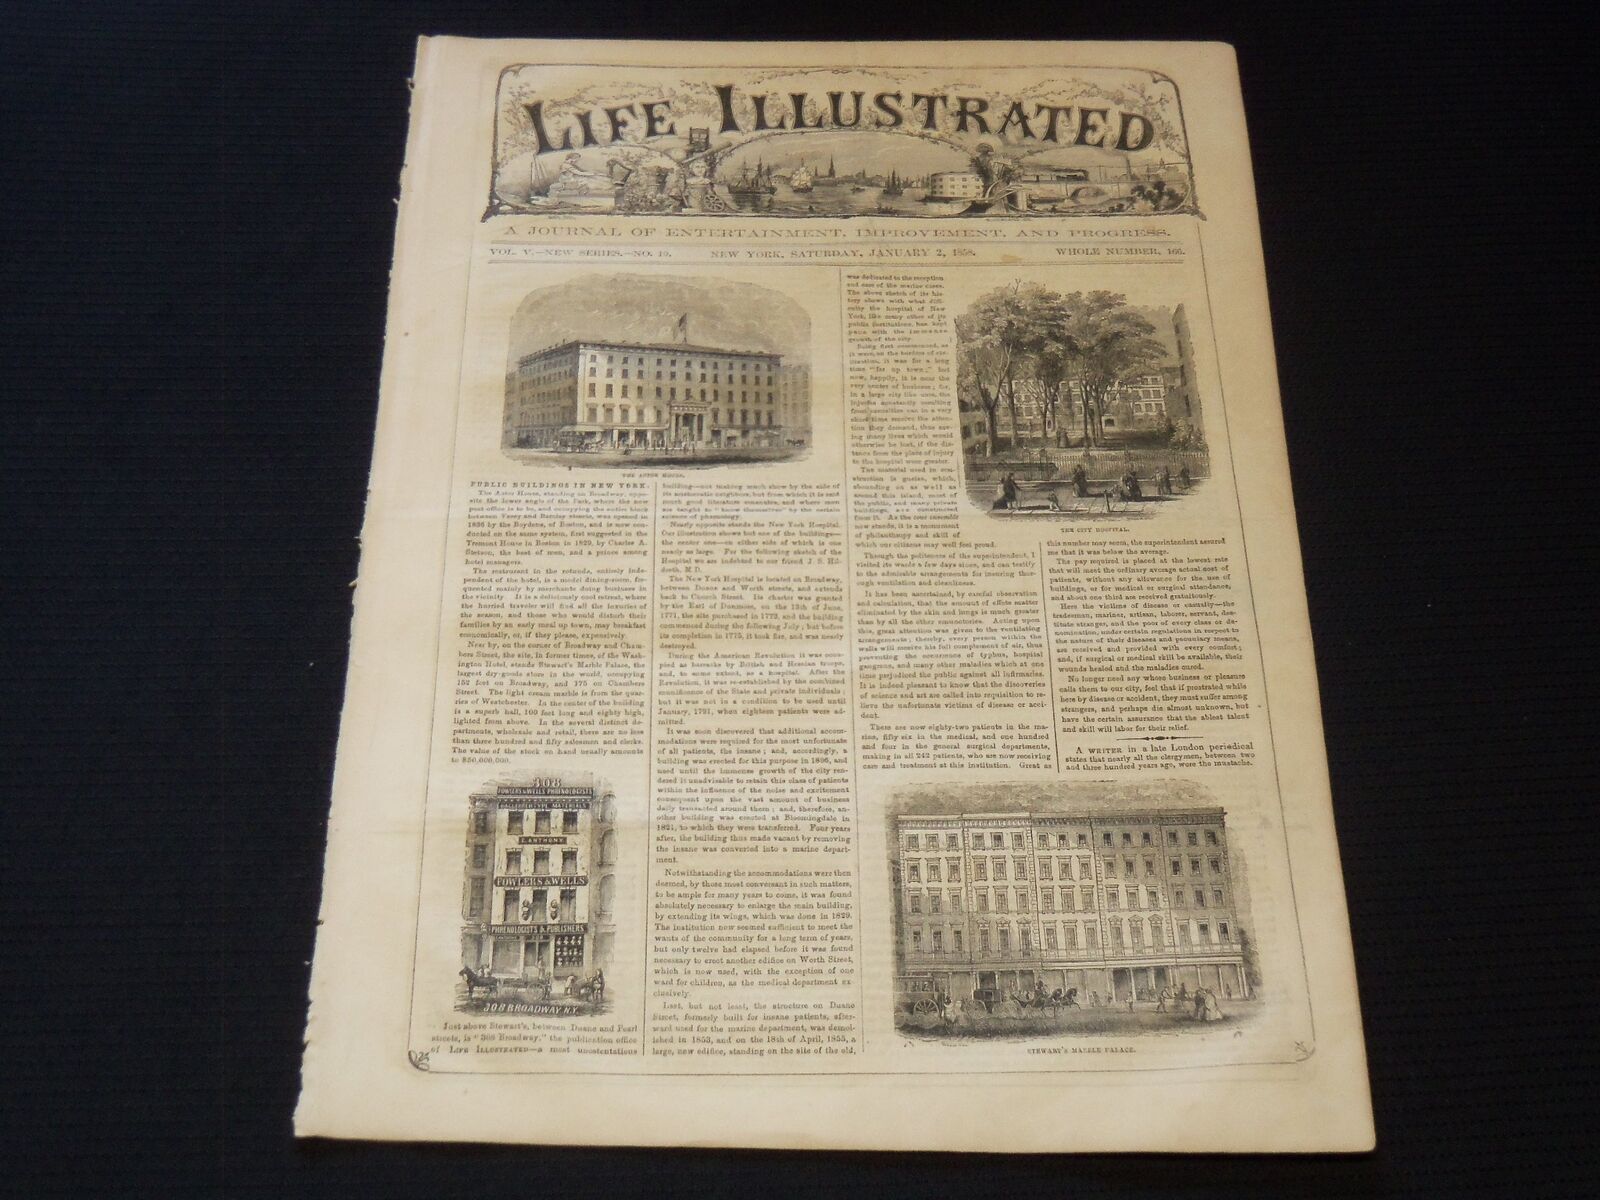 1858 JANUARY 2 LIFE ILLUSTRATED NEWSPAPER - PUBLIC BUILDINGS IN NY - NP 5904